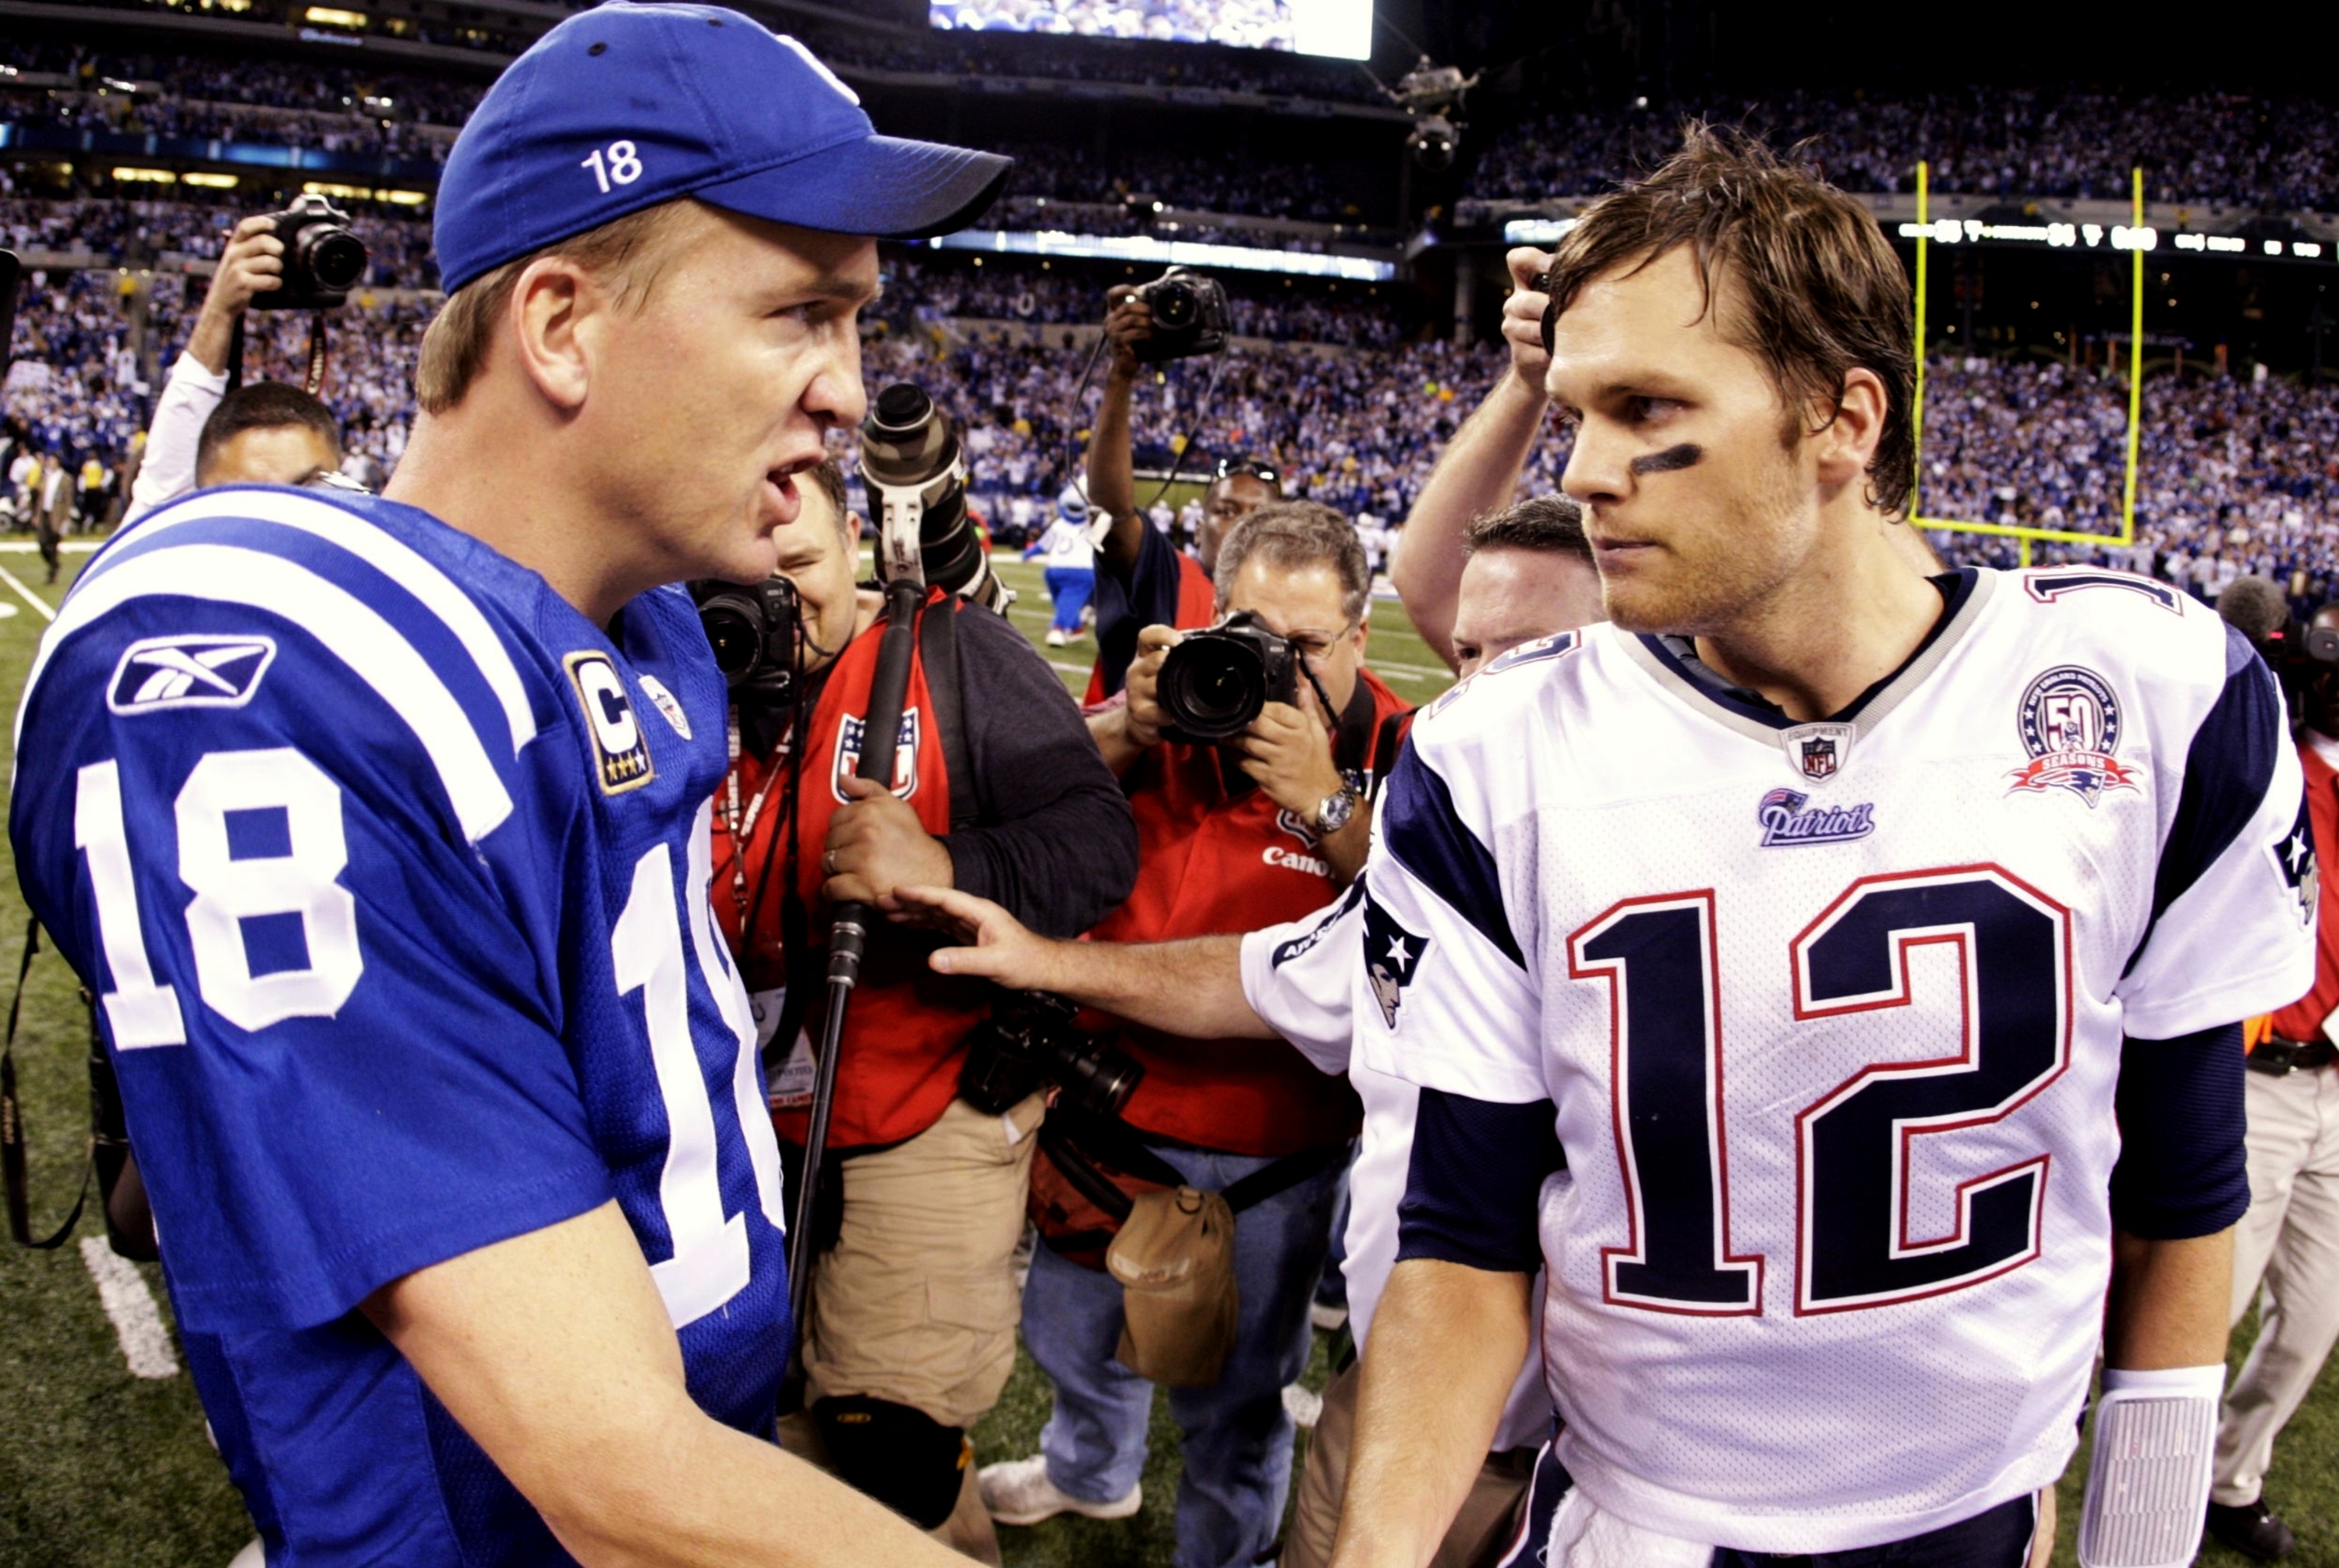 INDIANAPOLIS - NOVEMBER 15:  Quarterback Peyton Manning #18 of the Indianapolis Colts greets Tom Brady #12 of the New England Patriots after the game at Lucas Oil Stadium on November 15, 2009 in Indianapolis, Indiana.  The Colts won the game 35-34.  (Phot